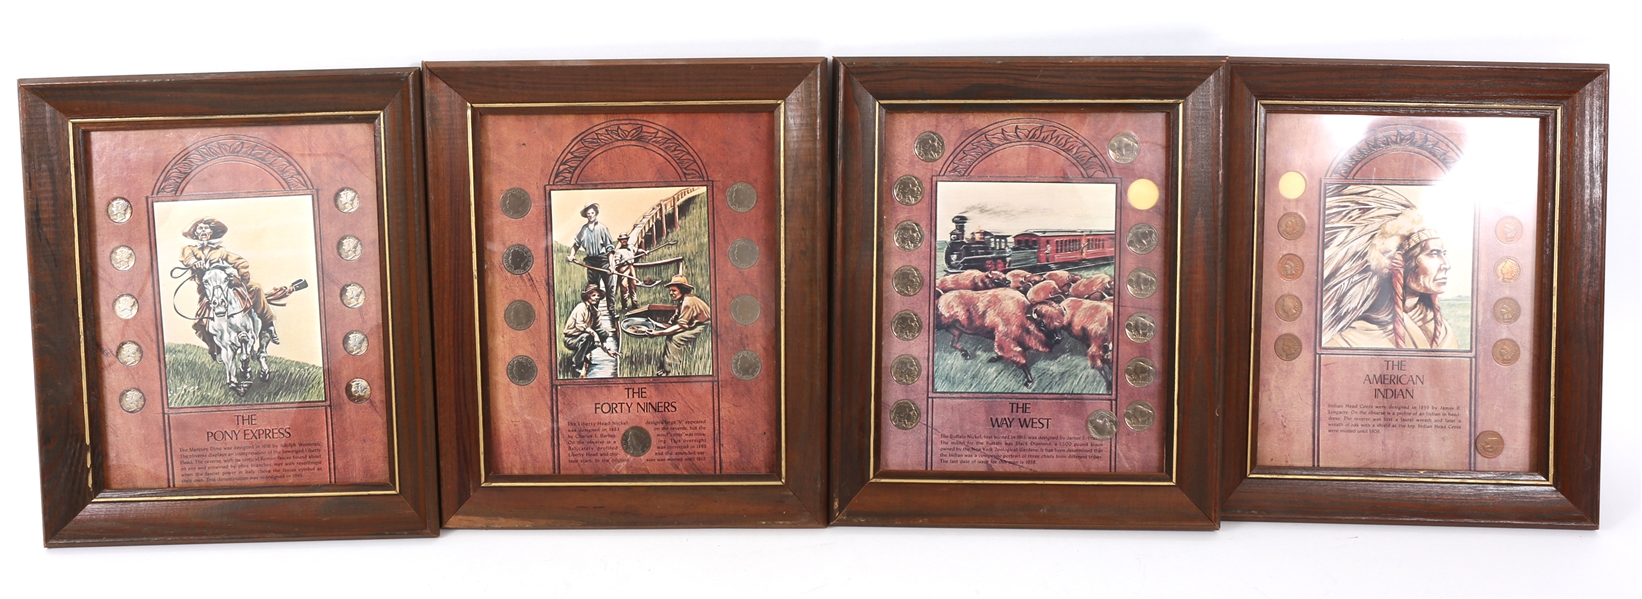 WESTERN THEME FRAMED U.S. COIN DISPLAYS LOT OF 4